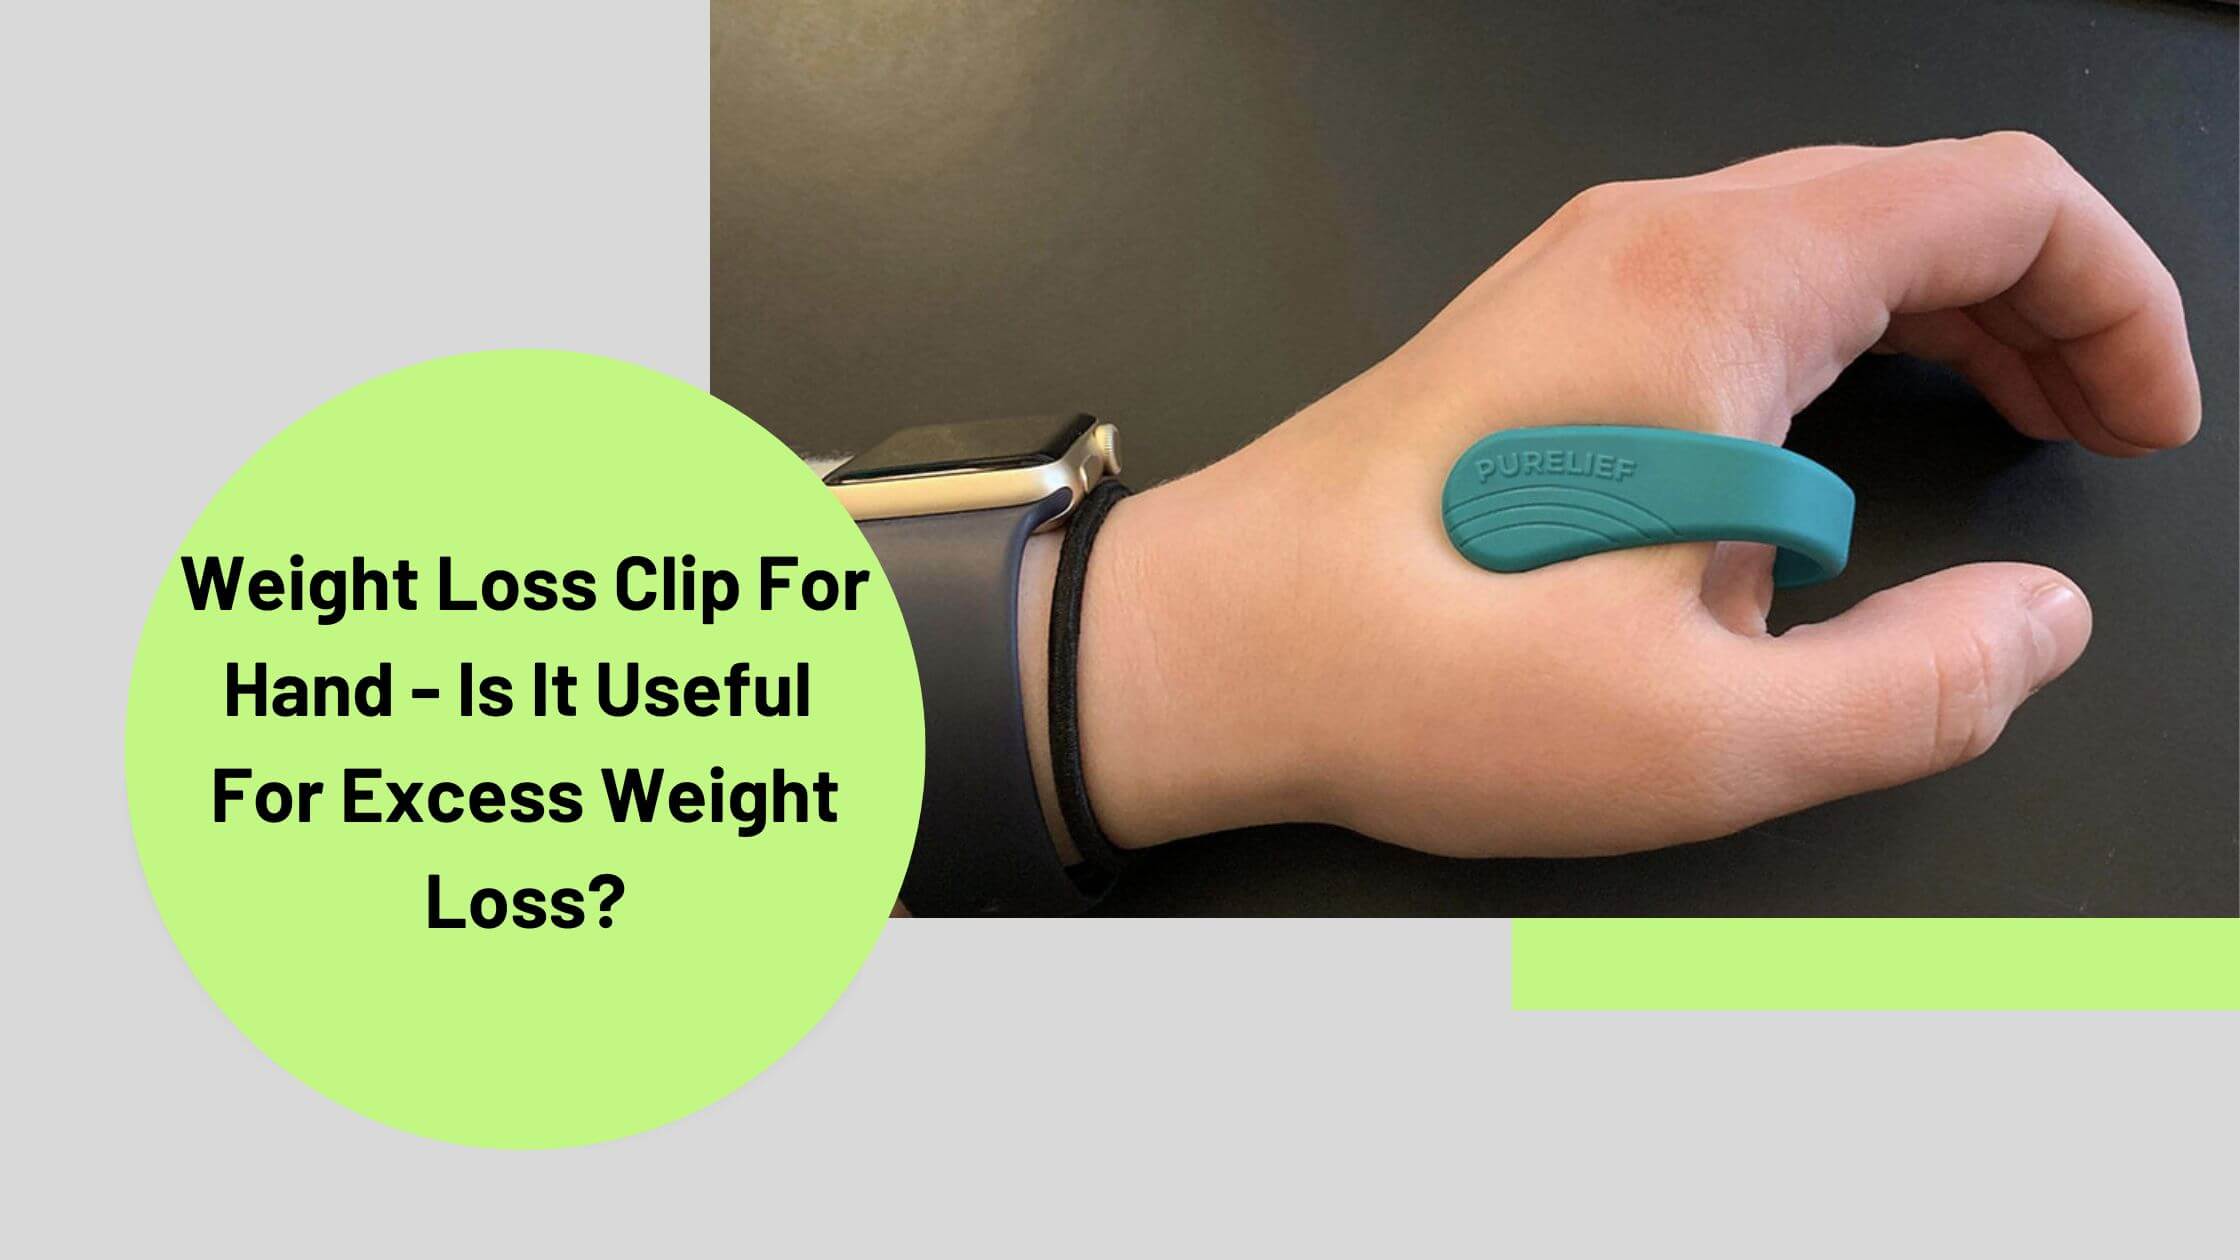 Weight Loss Clip For Hand